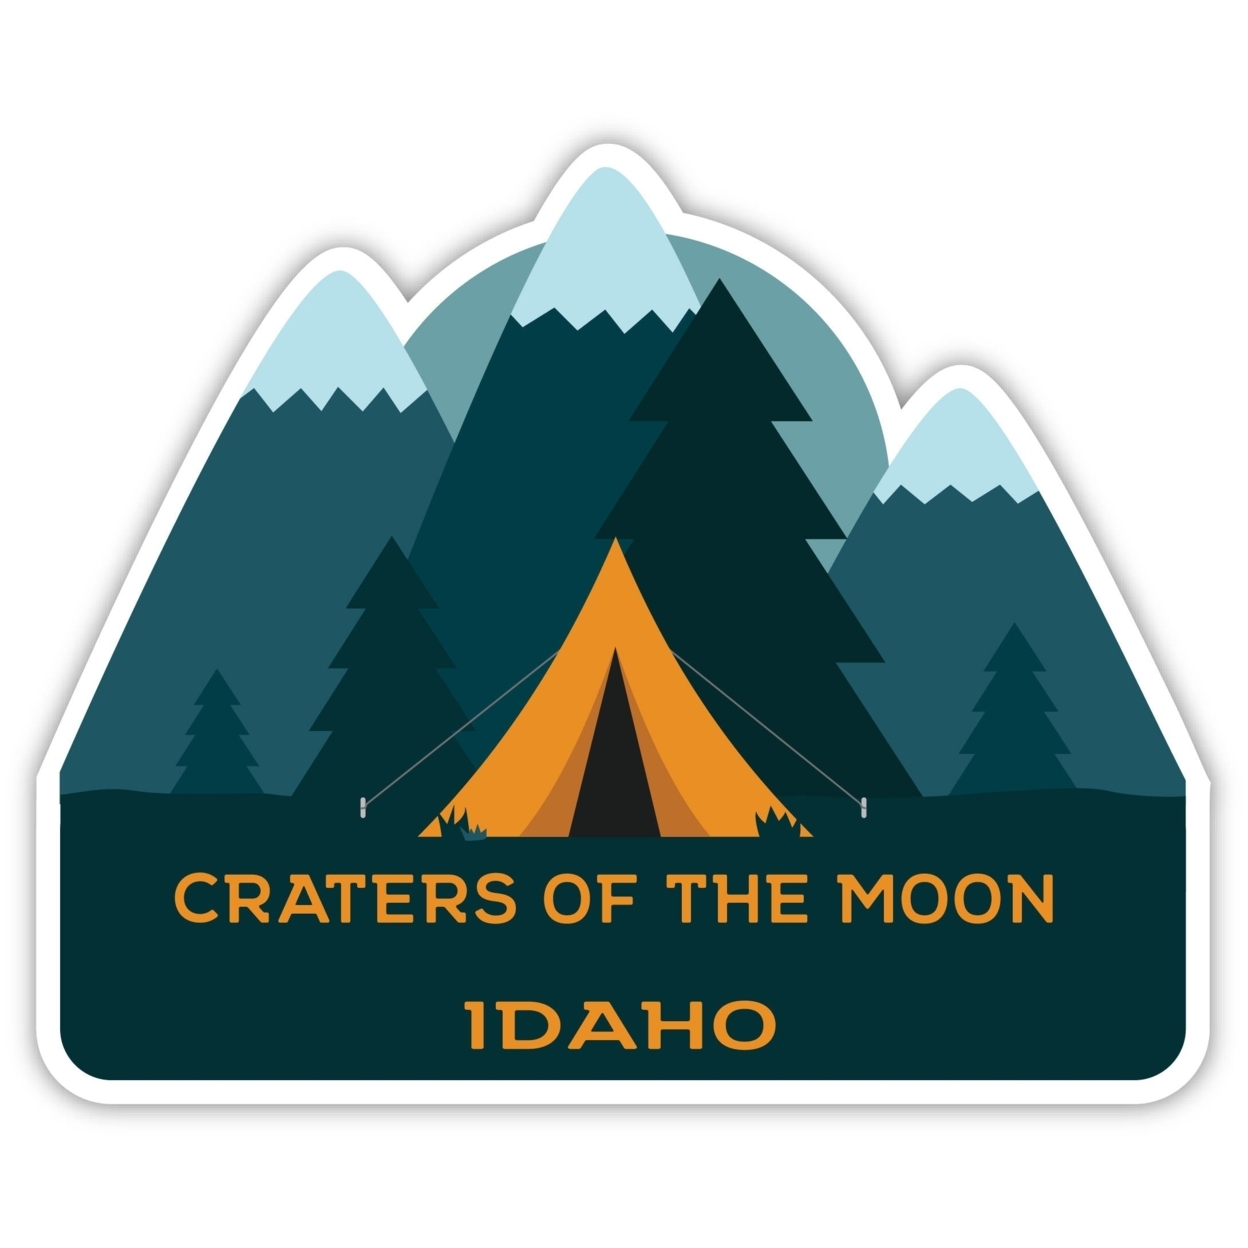 Craters Of The Moon Idaho Souvenir Decorative Stickers (Choose Theme And Size) - Single Unit, 12-Inch, Tent